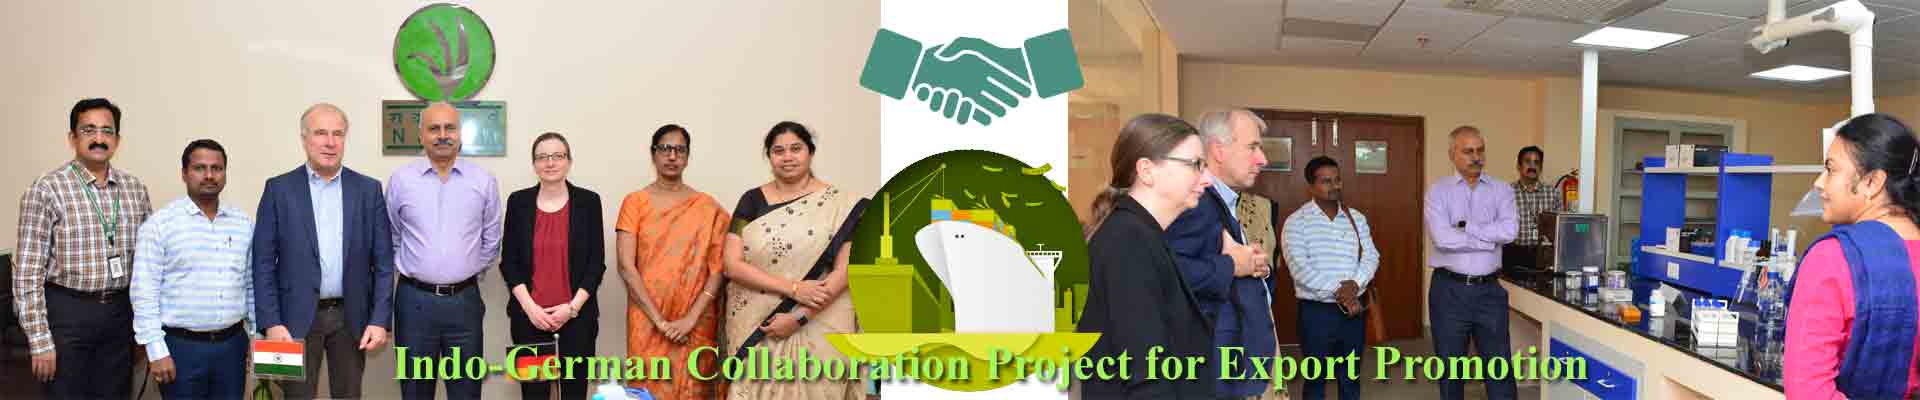 Indo-German Collaboration Project for Export Promotion